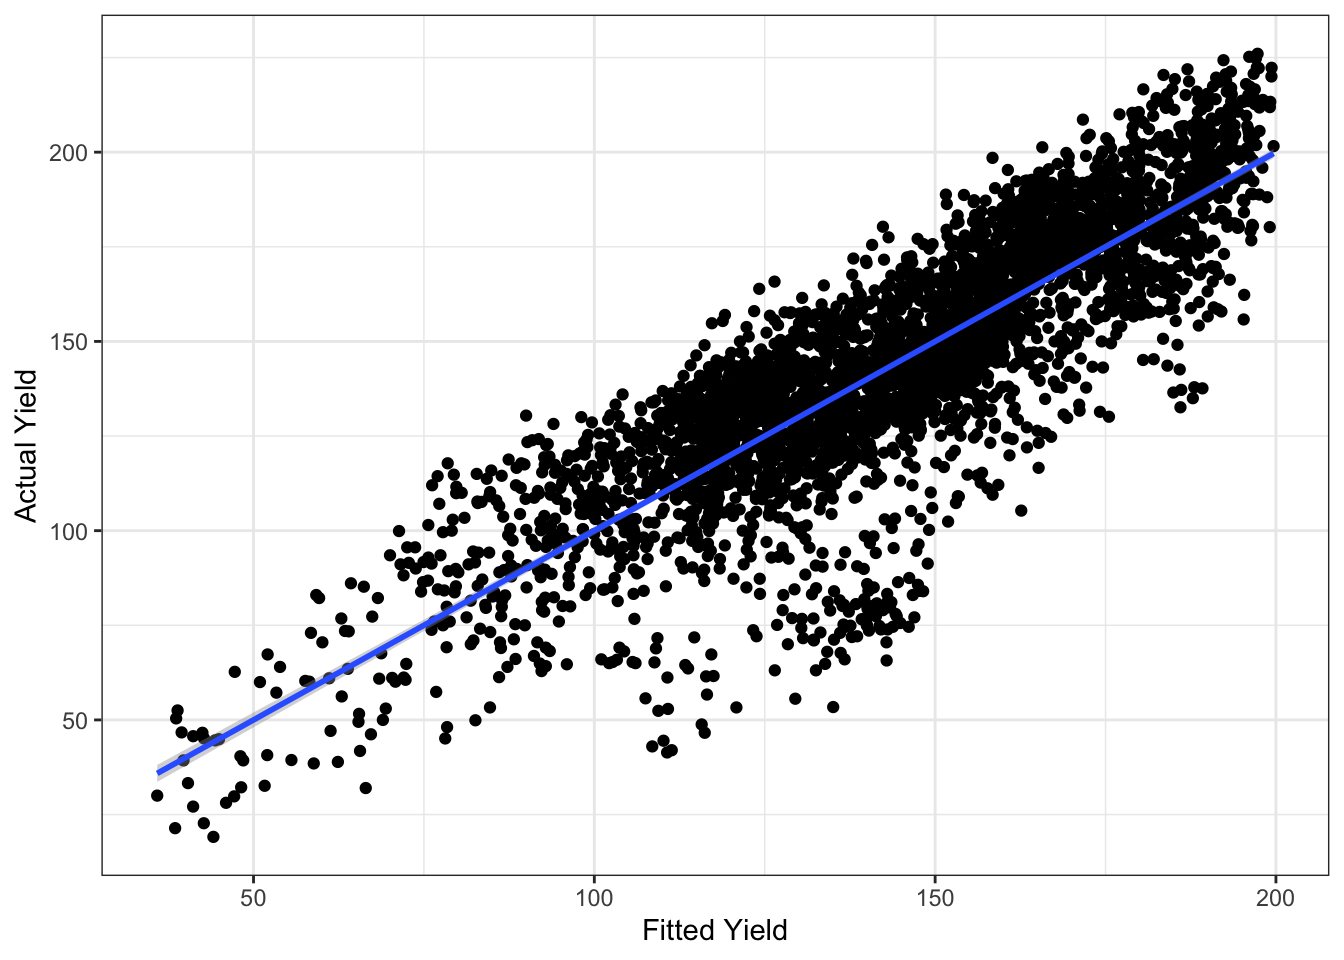 Fitted model yield values versus actual yield values for all counties of Iowa over all available years, from 1981 to 2018.